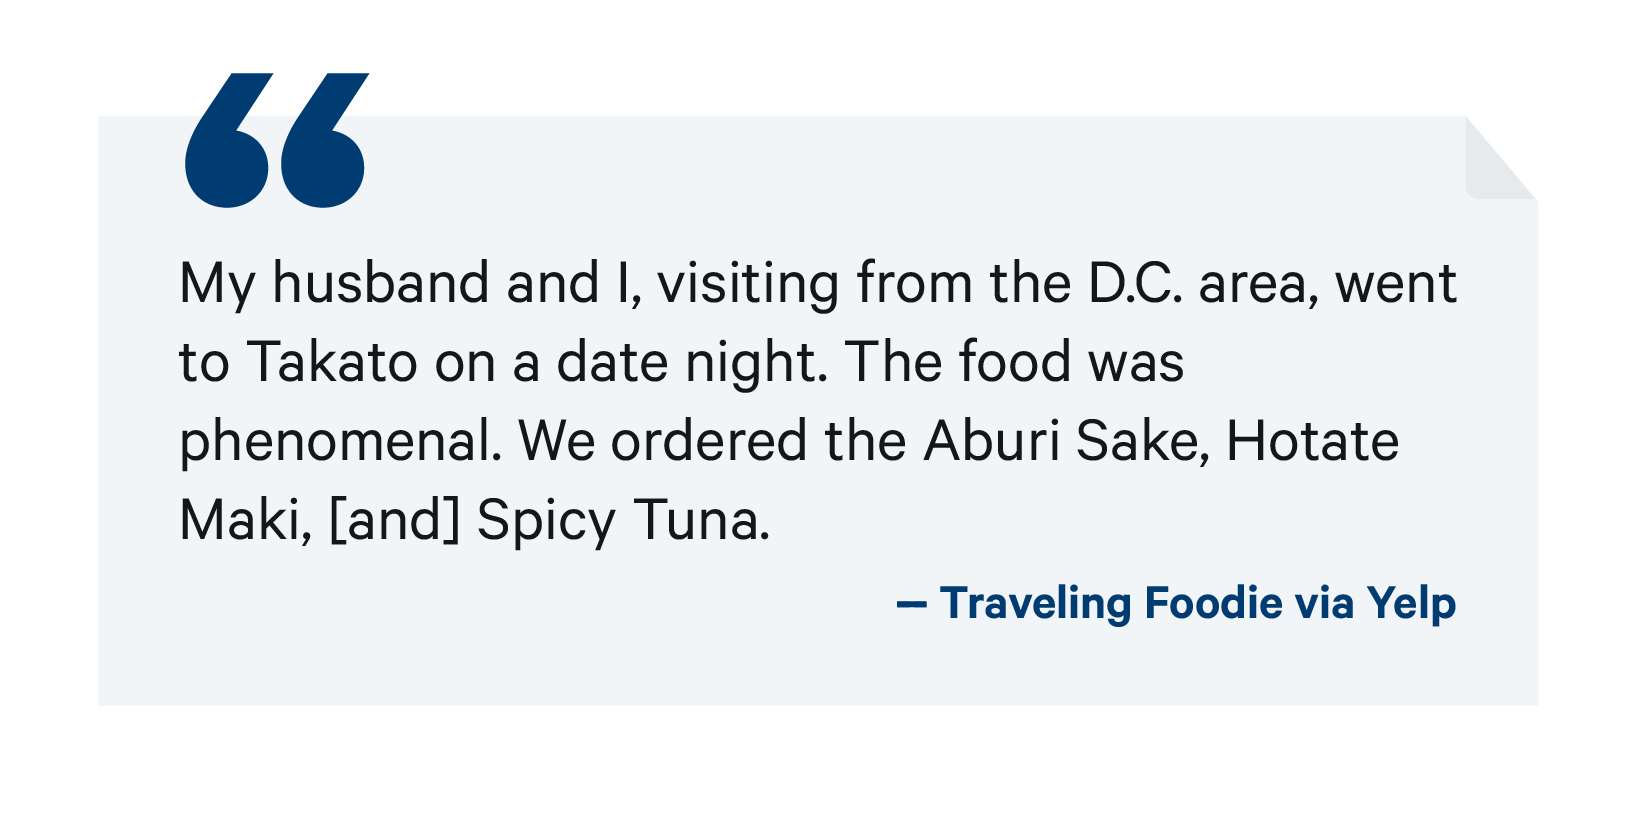 Quote from a traveling foodie via yelp